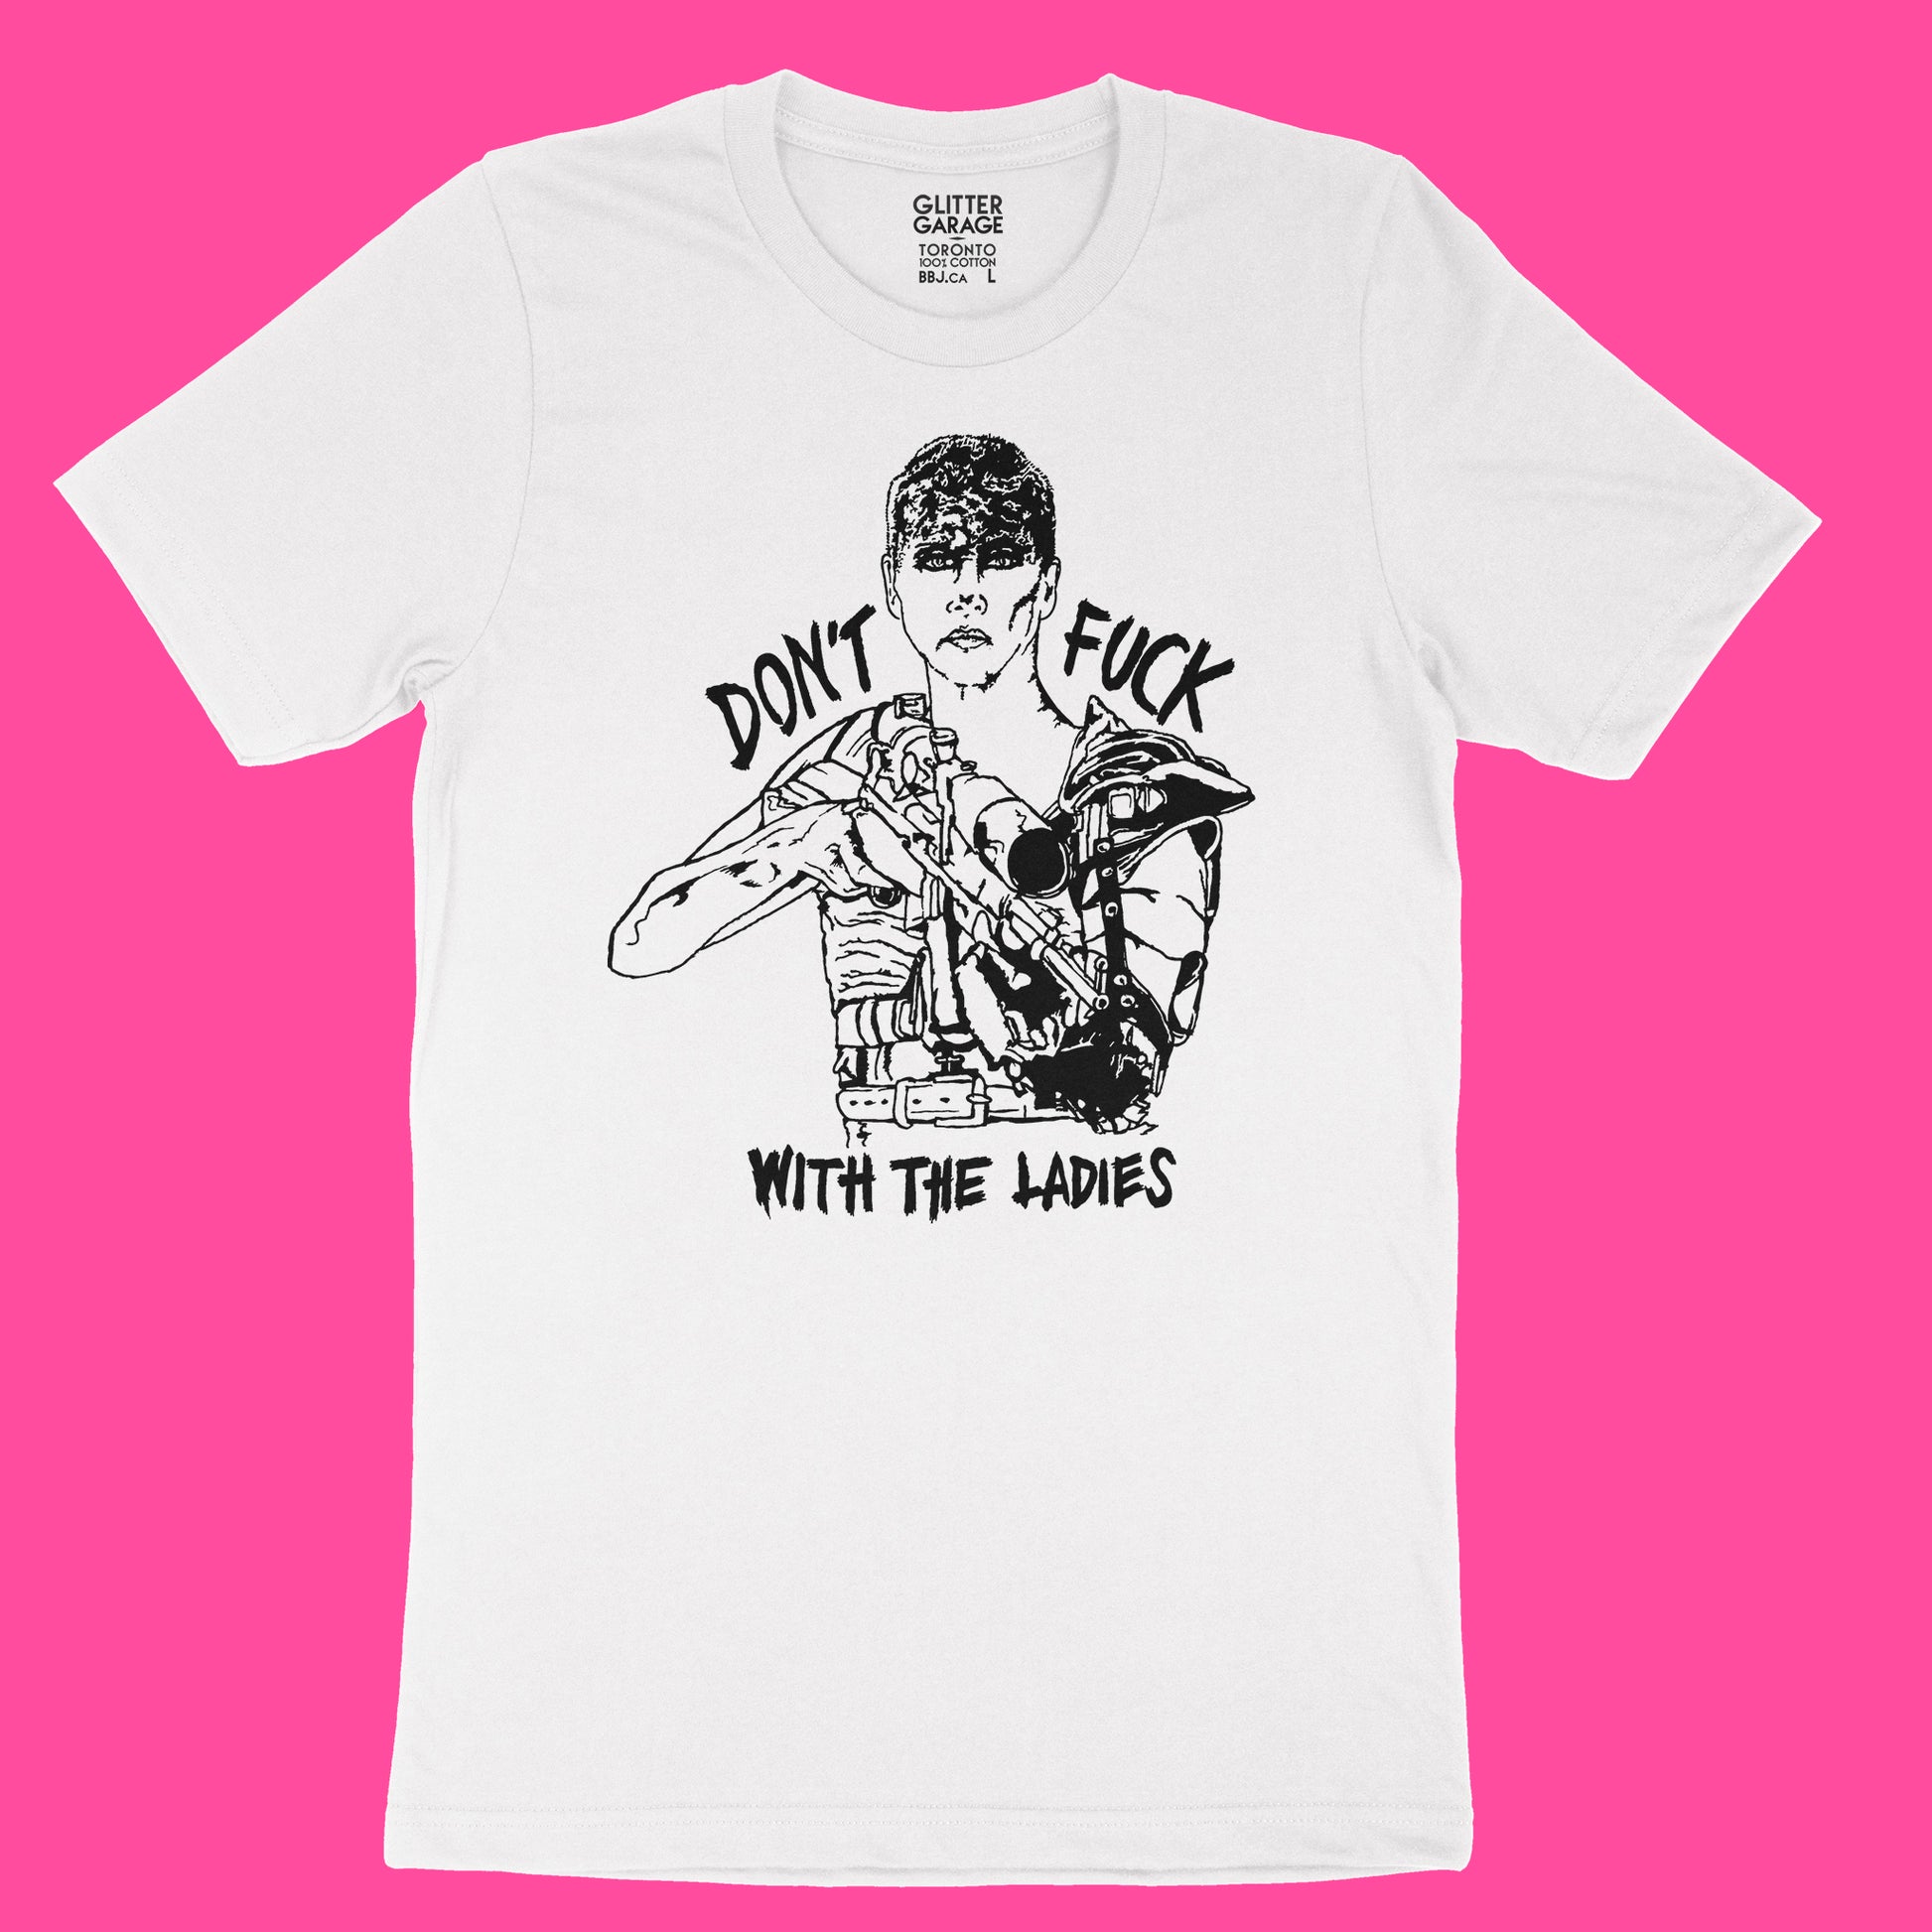 White unisex cotton t-shirt with Furiosa illustration, "Don't Fuck With The Ladies" text in black by BBJ / Glitter Garage